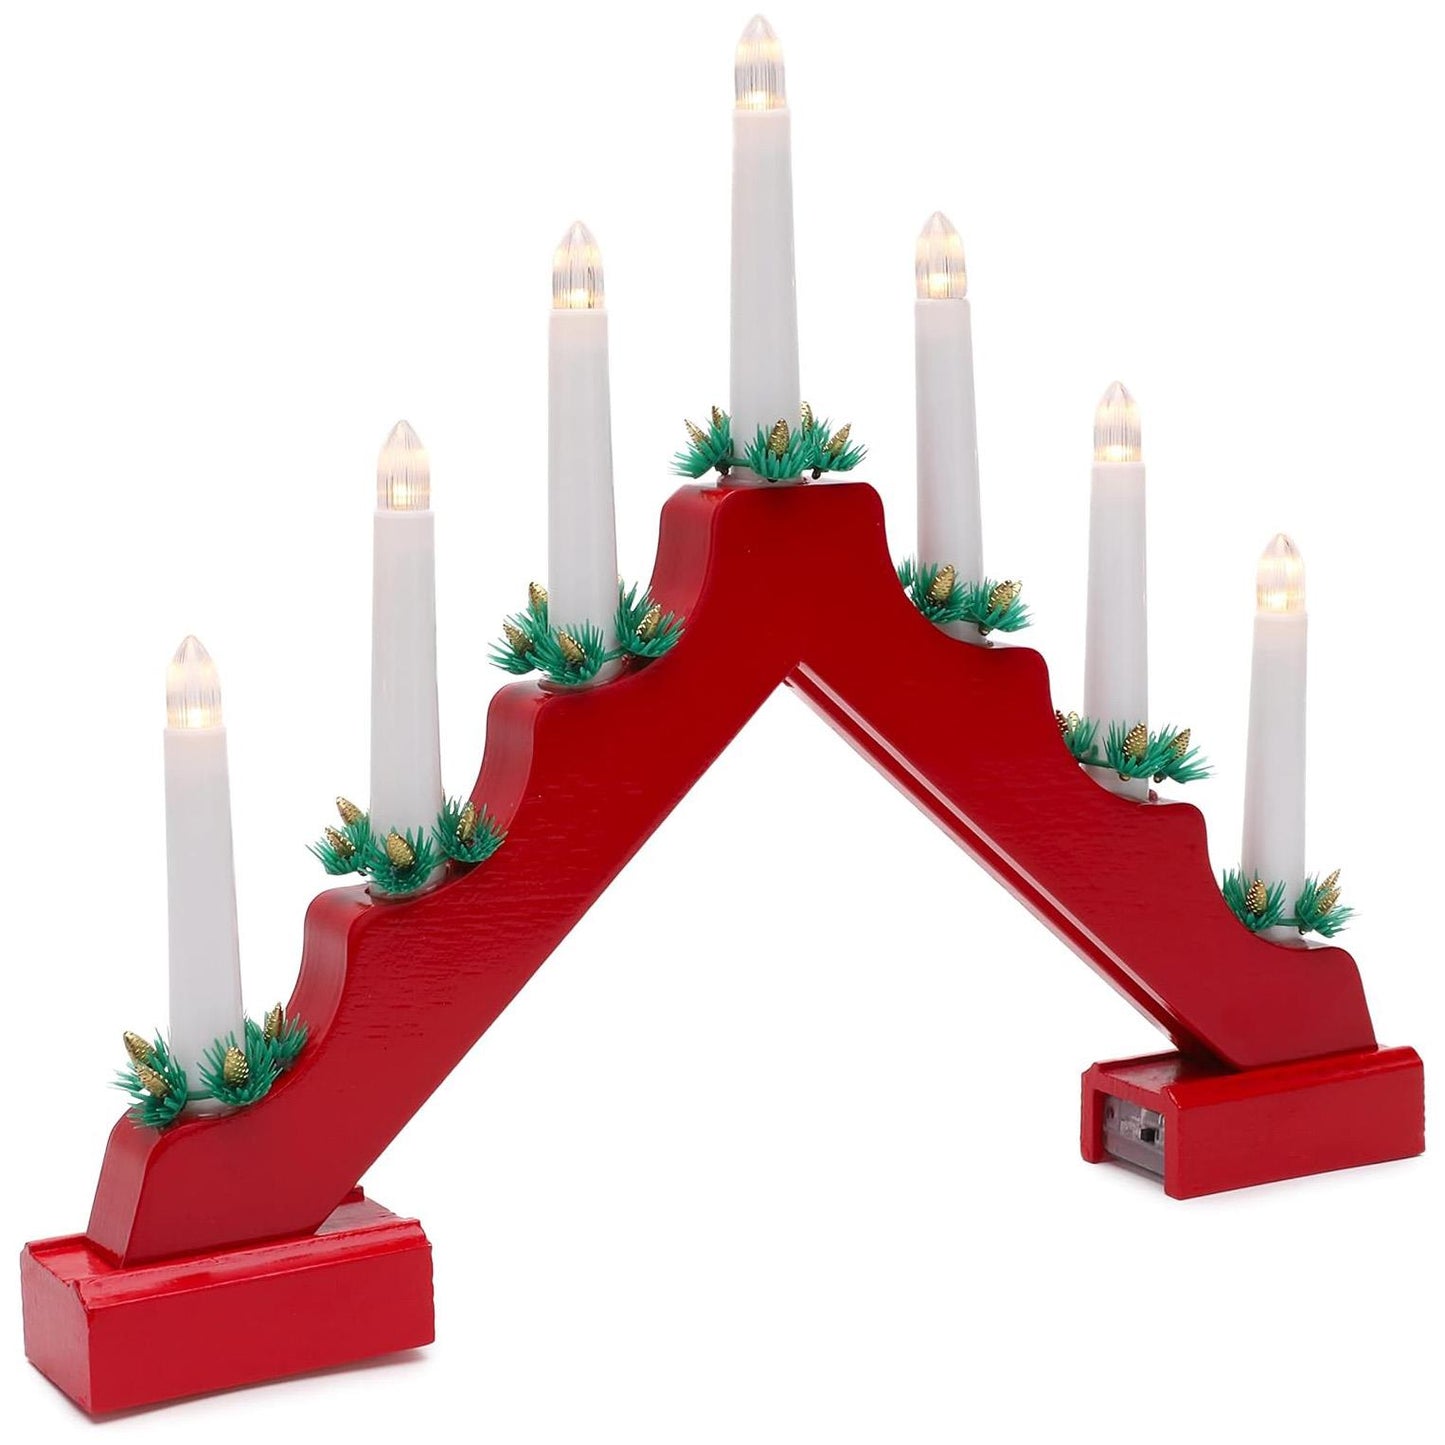 Red Wooden Candle Bridge With 7 Led Lights by GEEZY - UKBuyZone